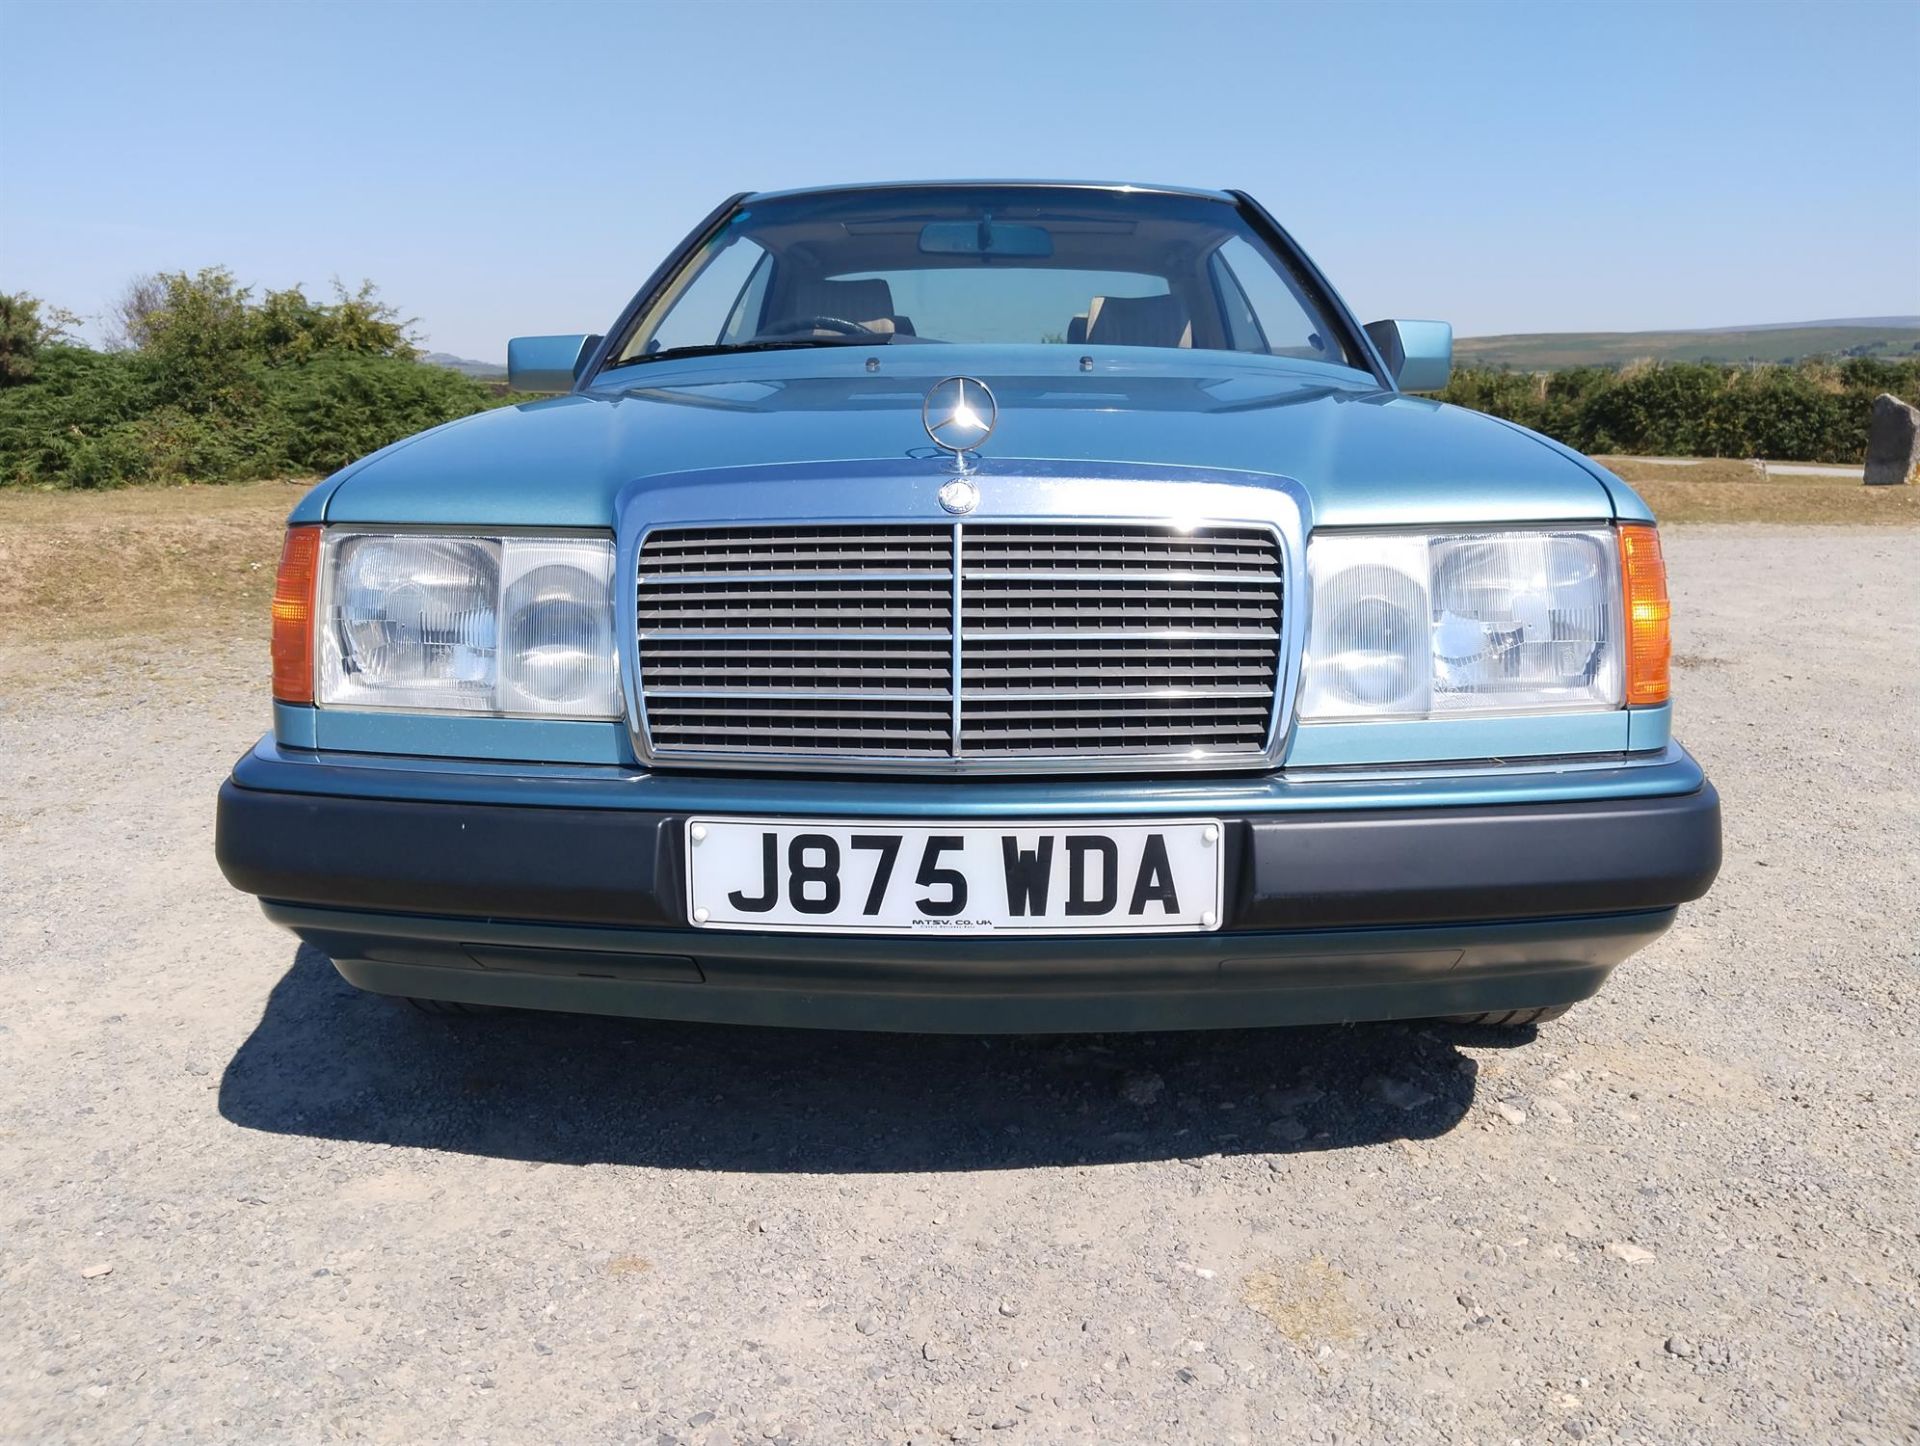 1990 Mercedes-Benz 230CE (W124) - Image 4 of 10